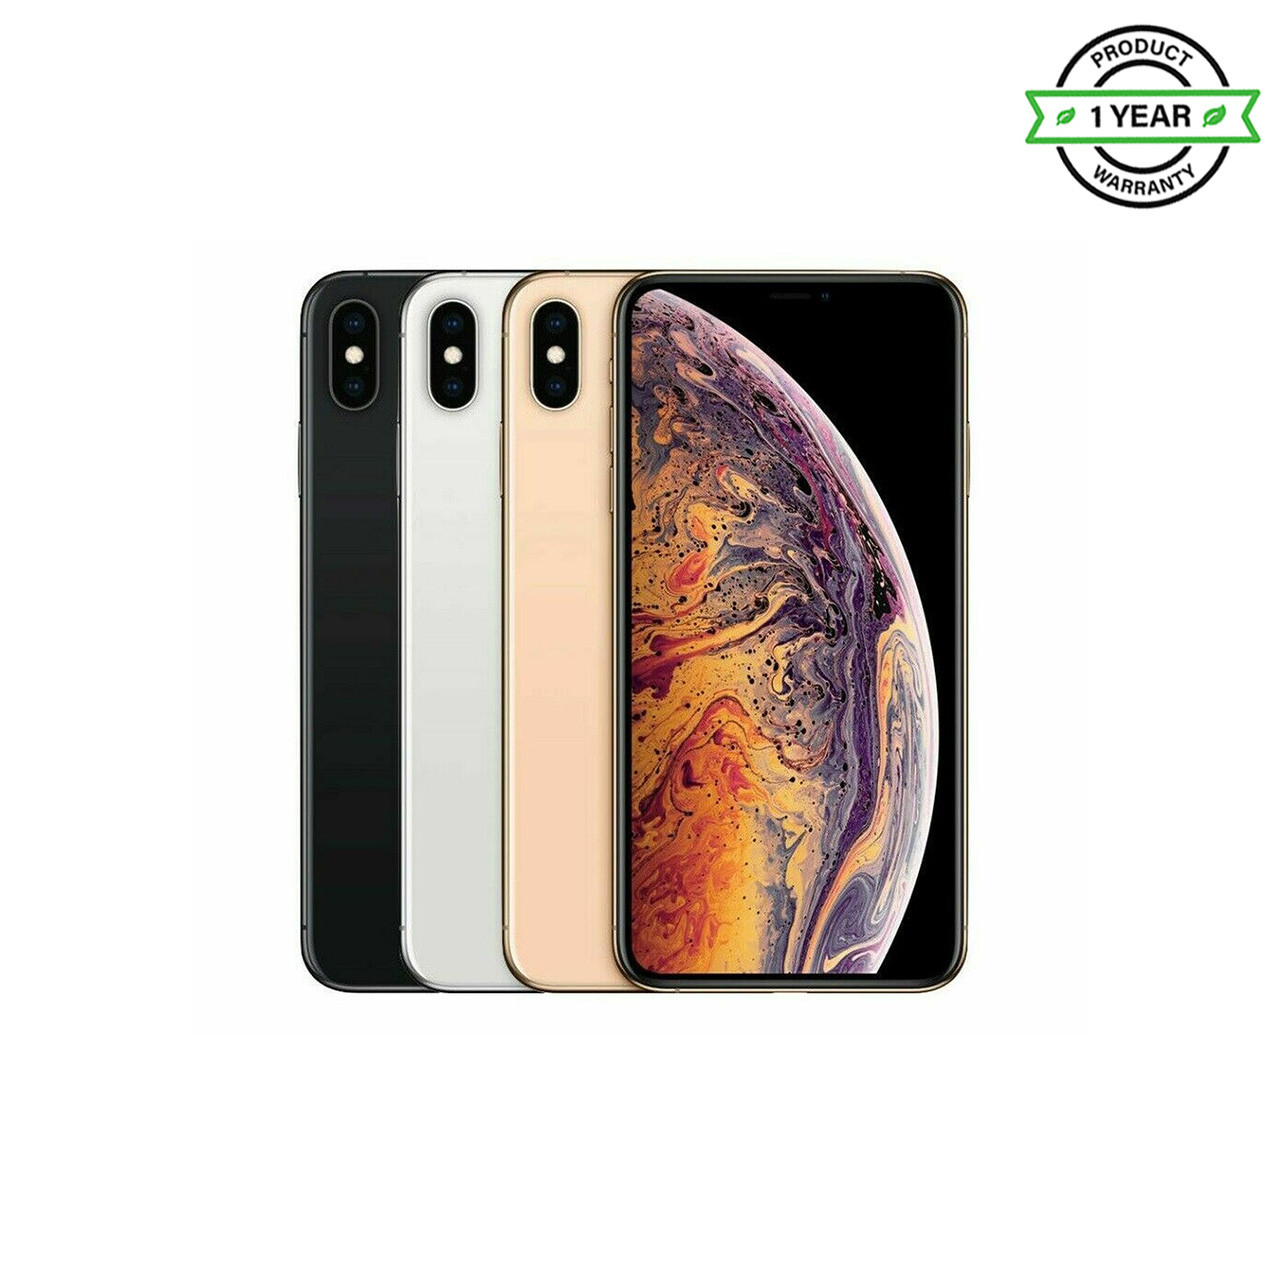 iPhone XS 64GB Space Gray - New battery - Refurbished product